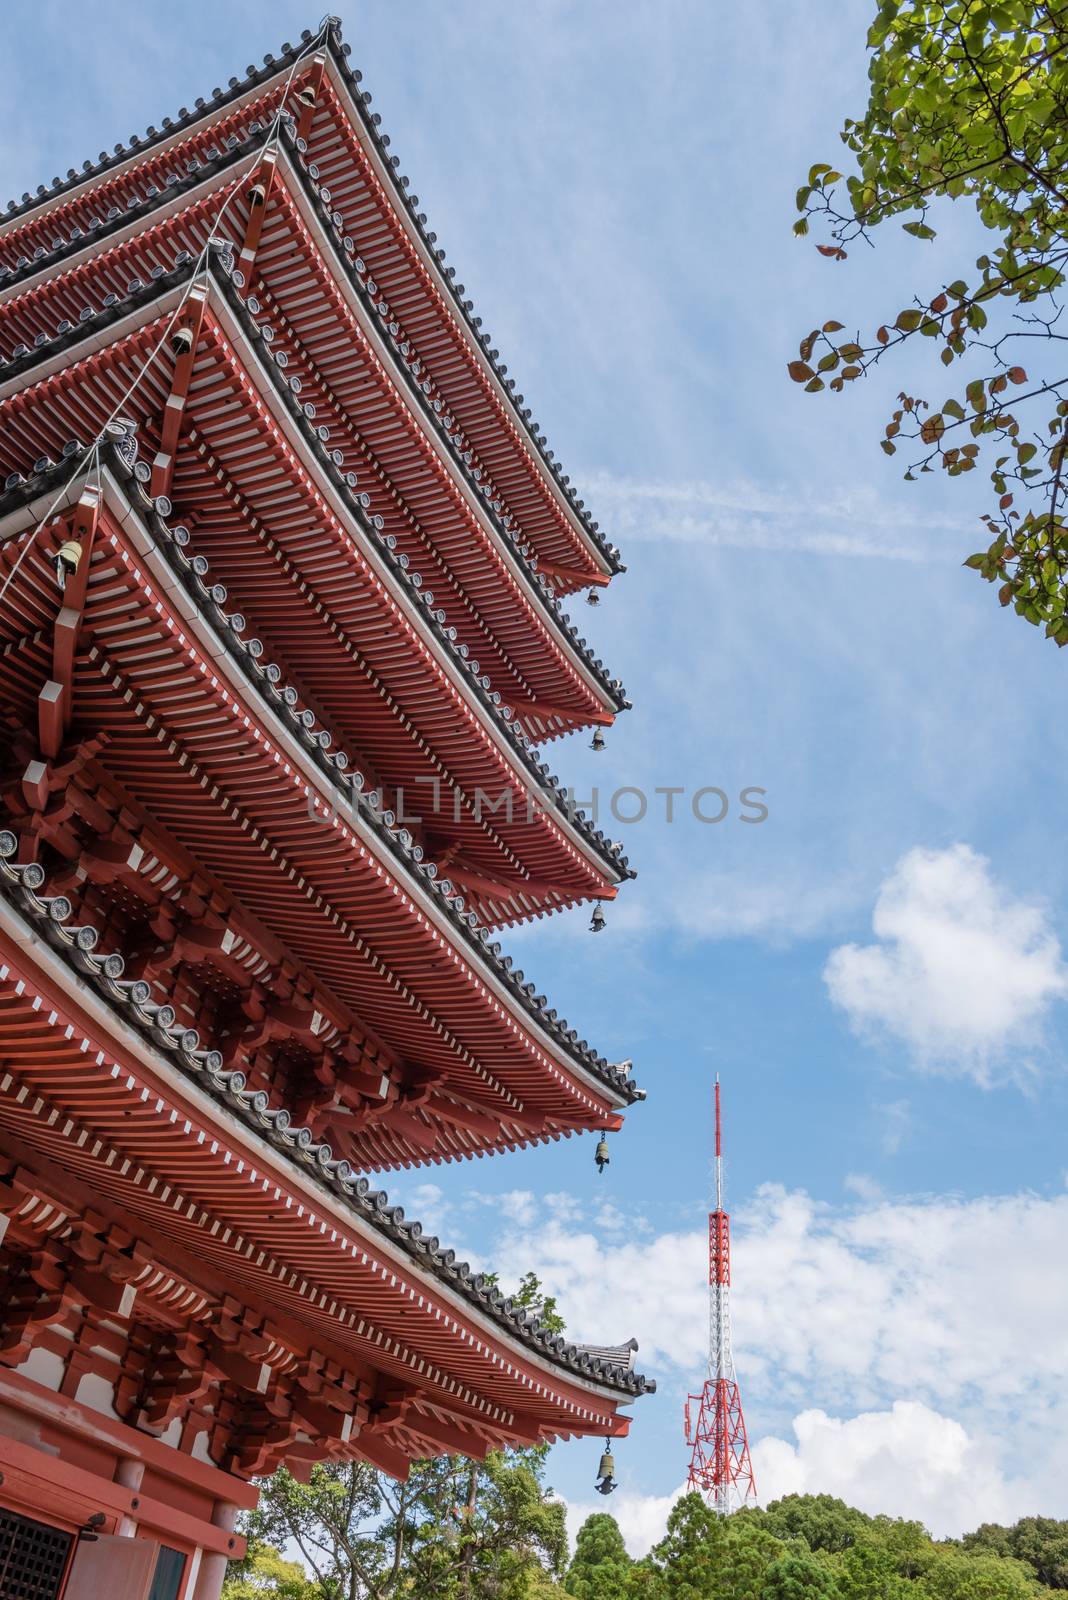 Old and New Japan by justtscott